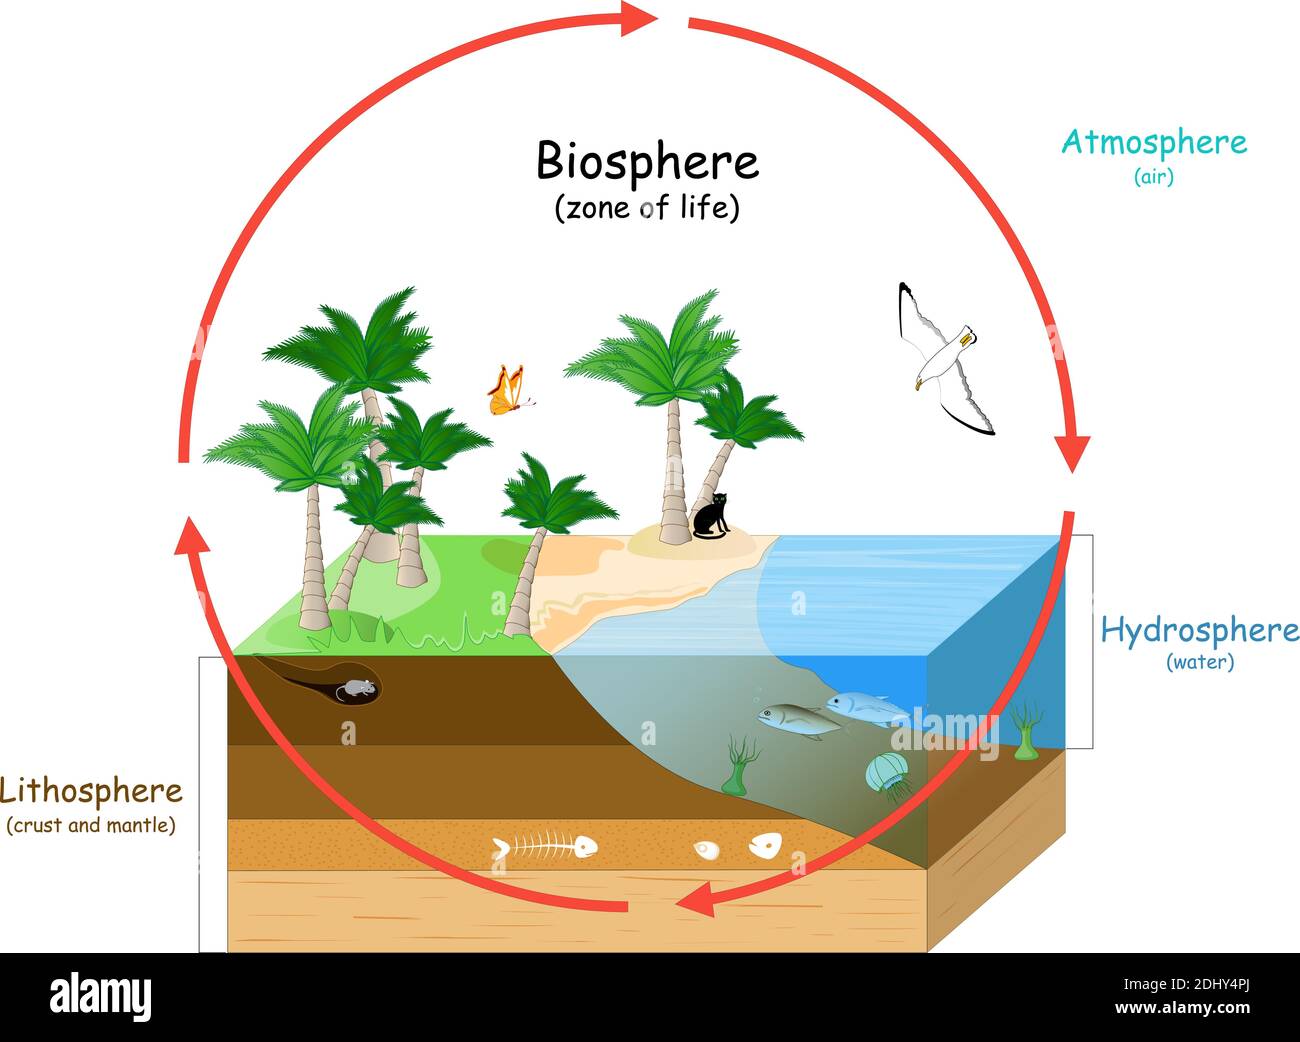 Biosphere is a zone of life on Earth. natural ecosystems with wildlife. Ecosphere (environment), Hydrosphere (water), Atmosphere (air), Lithosphere Stock Vector